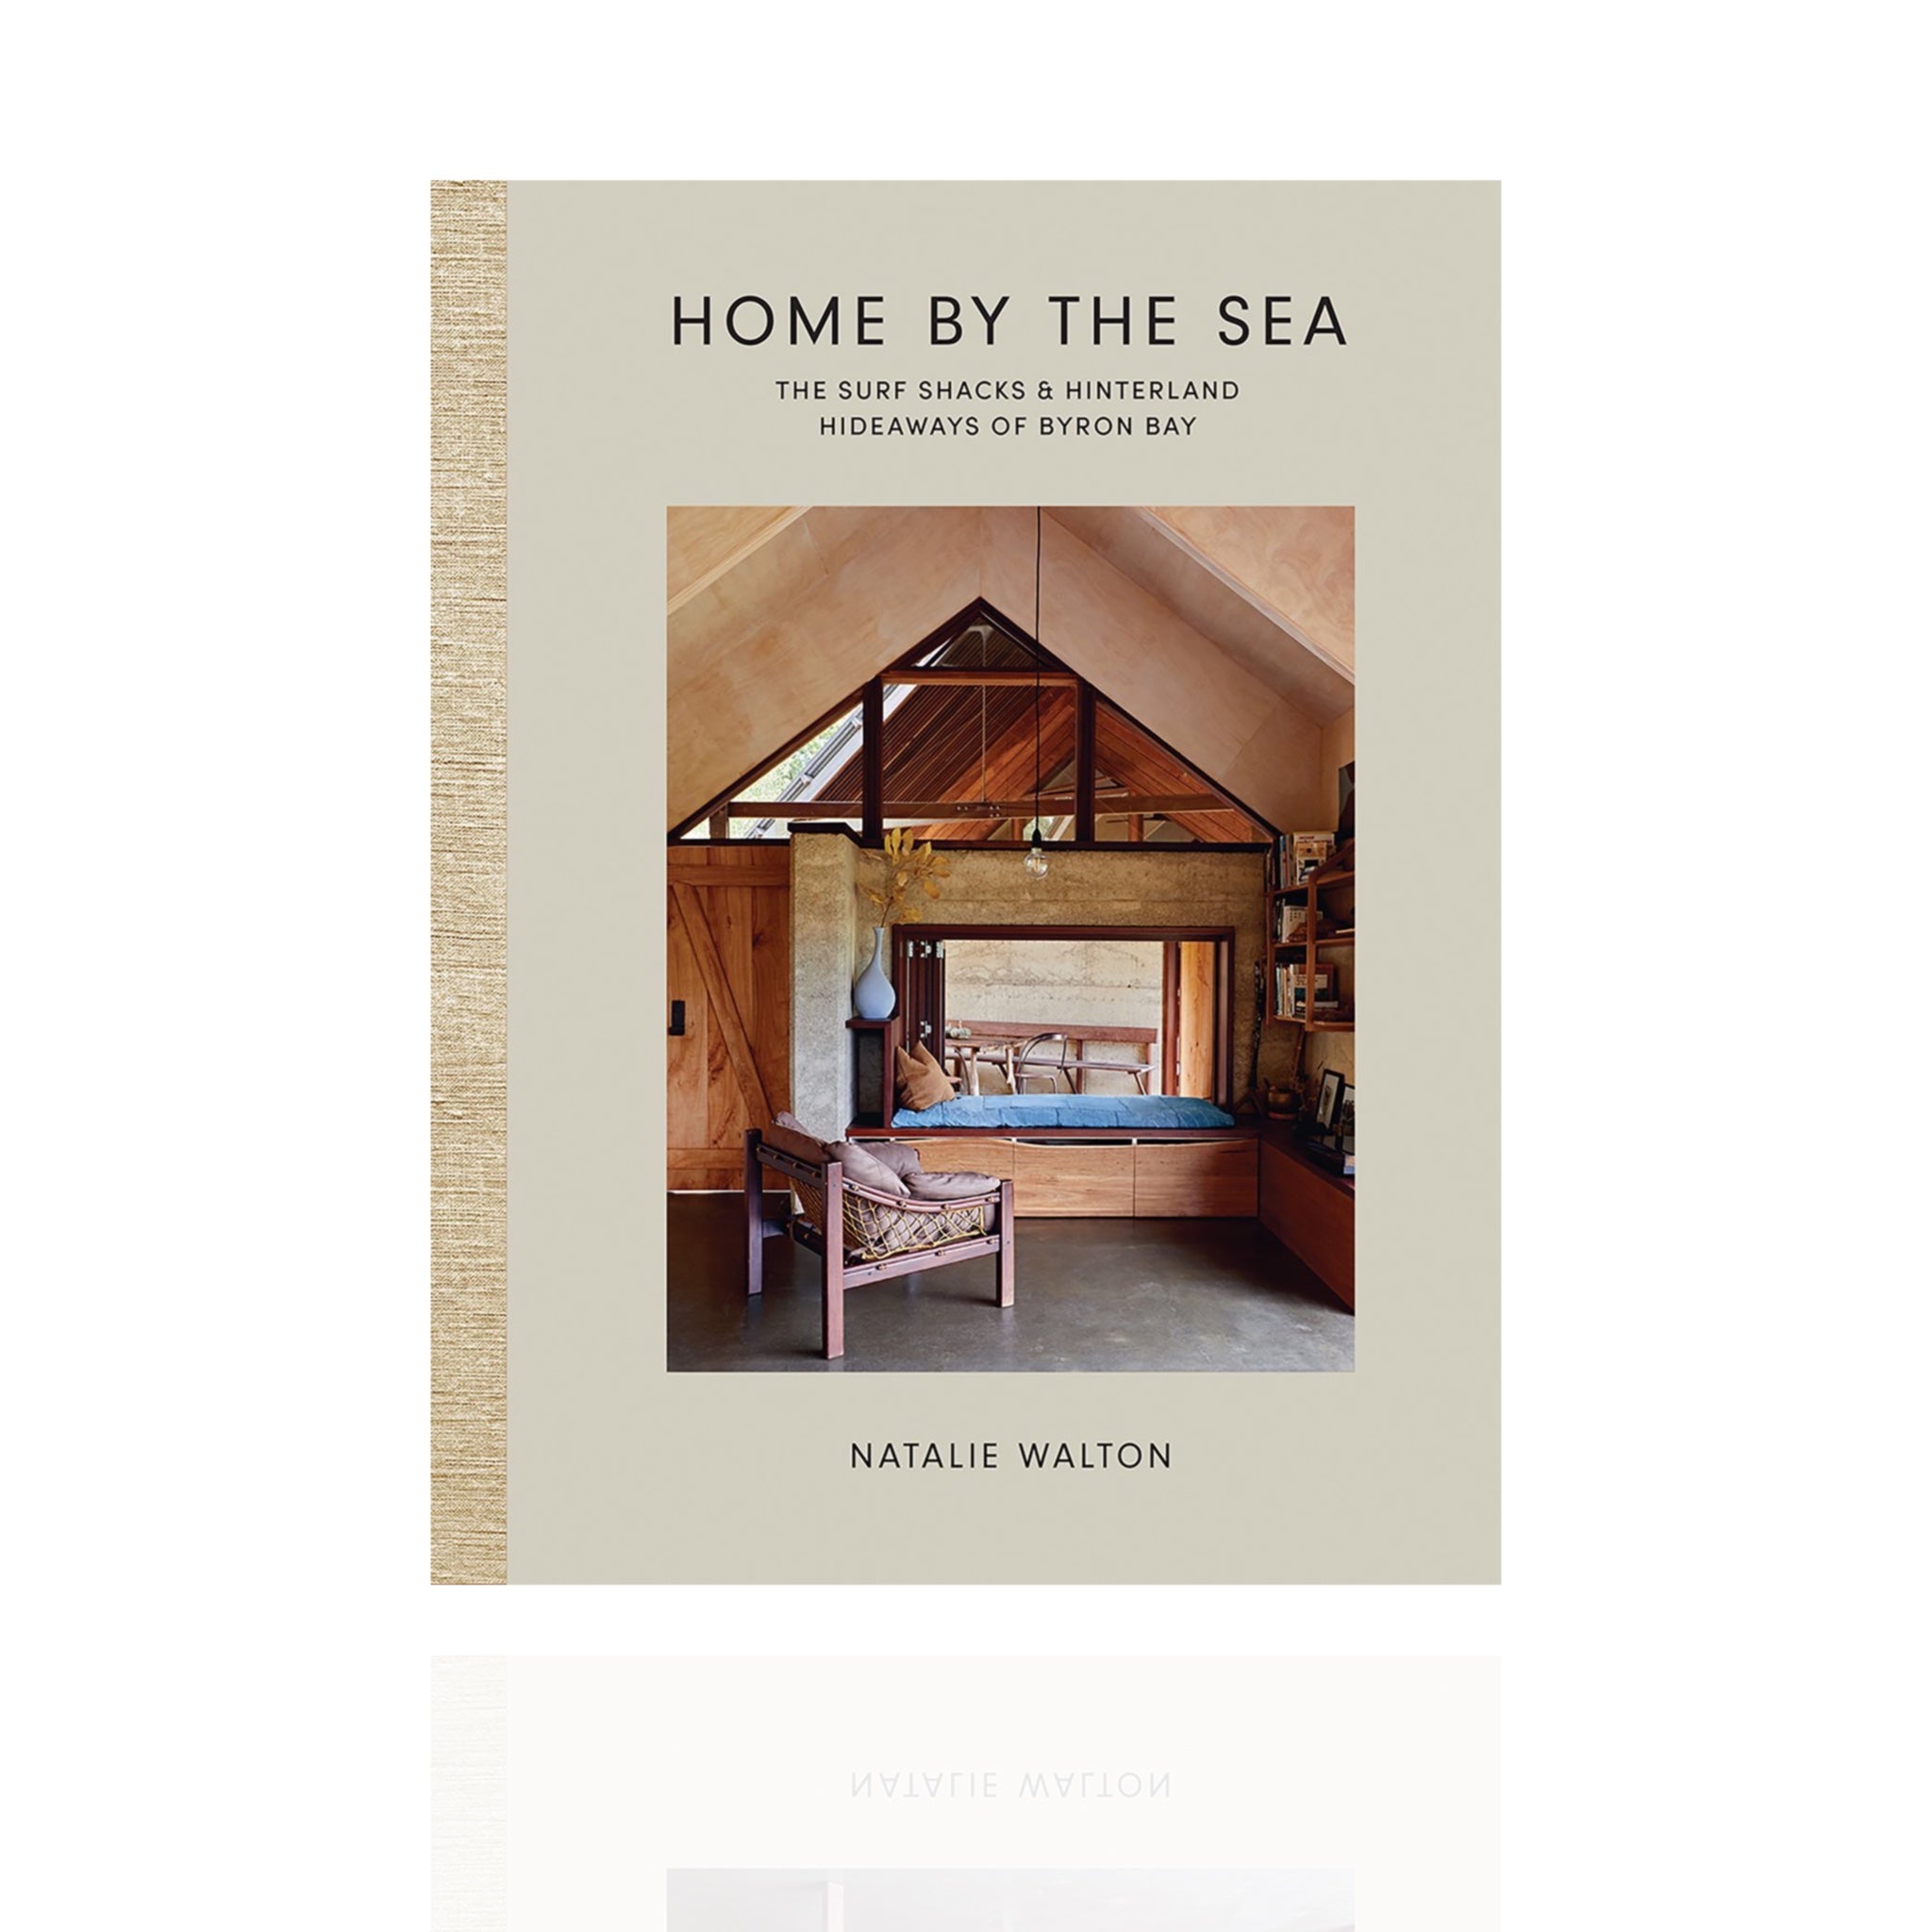 Home by the sea book 